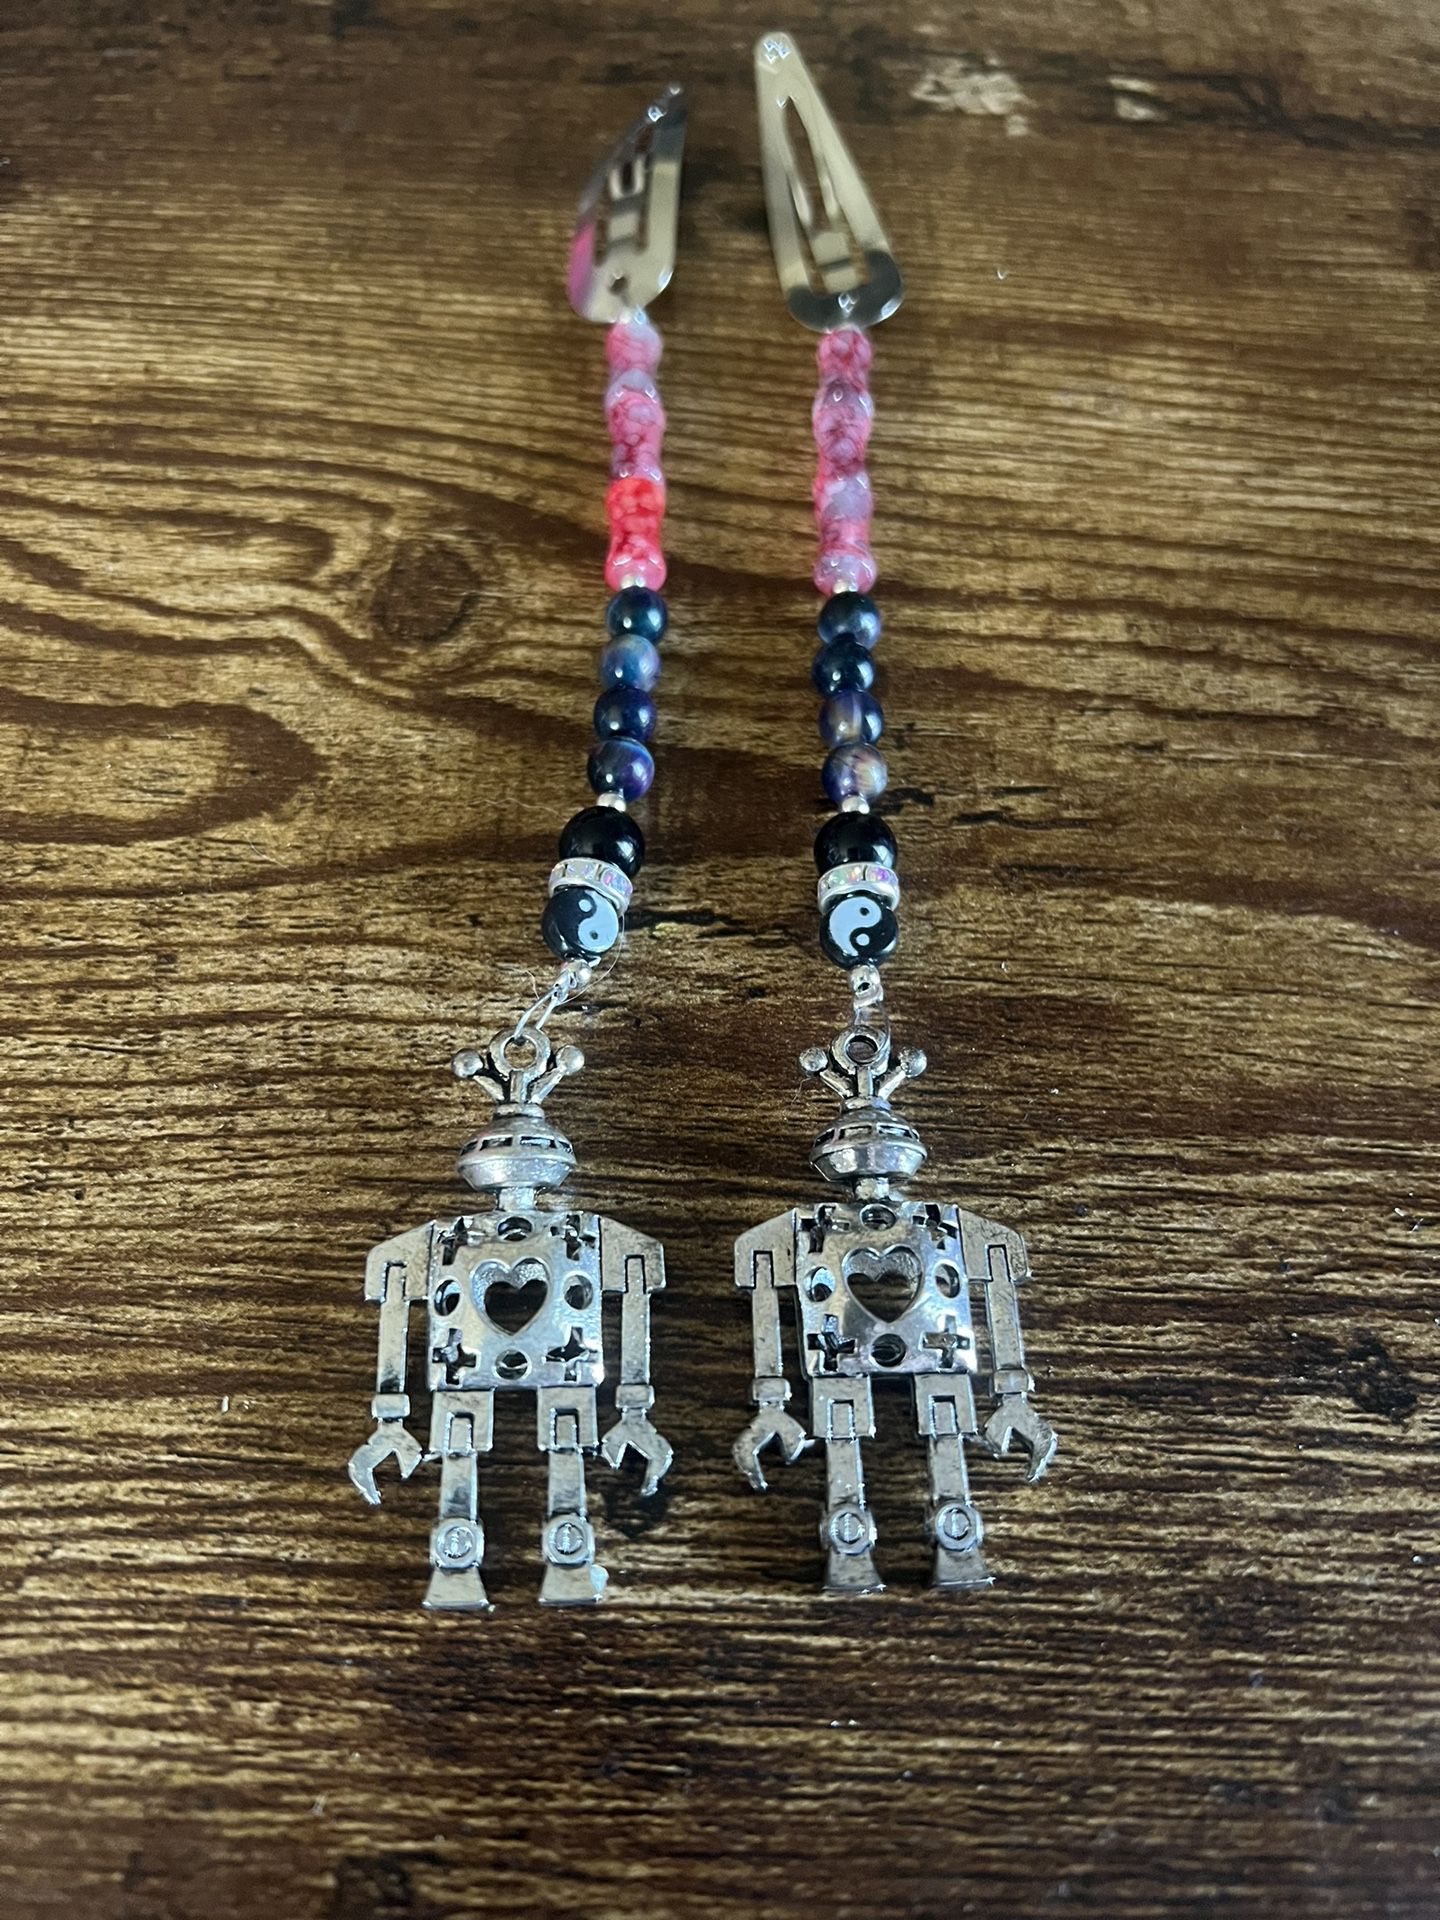 Silver Hair Clips With Beads And Robot Charms